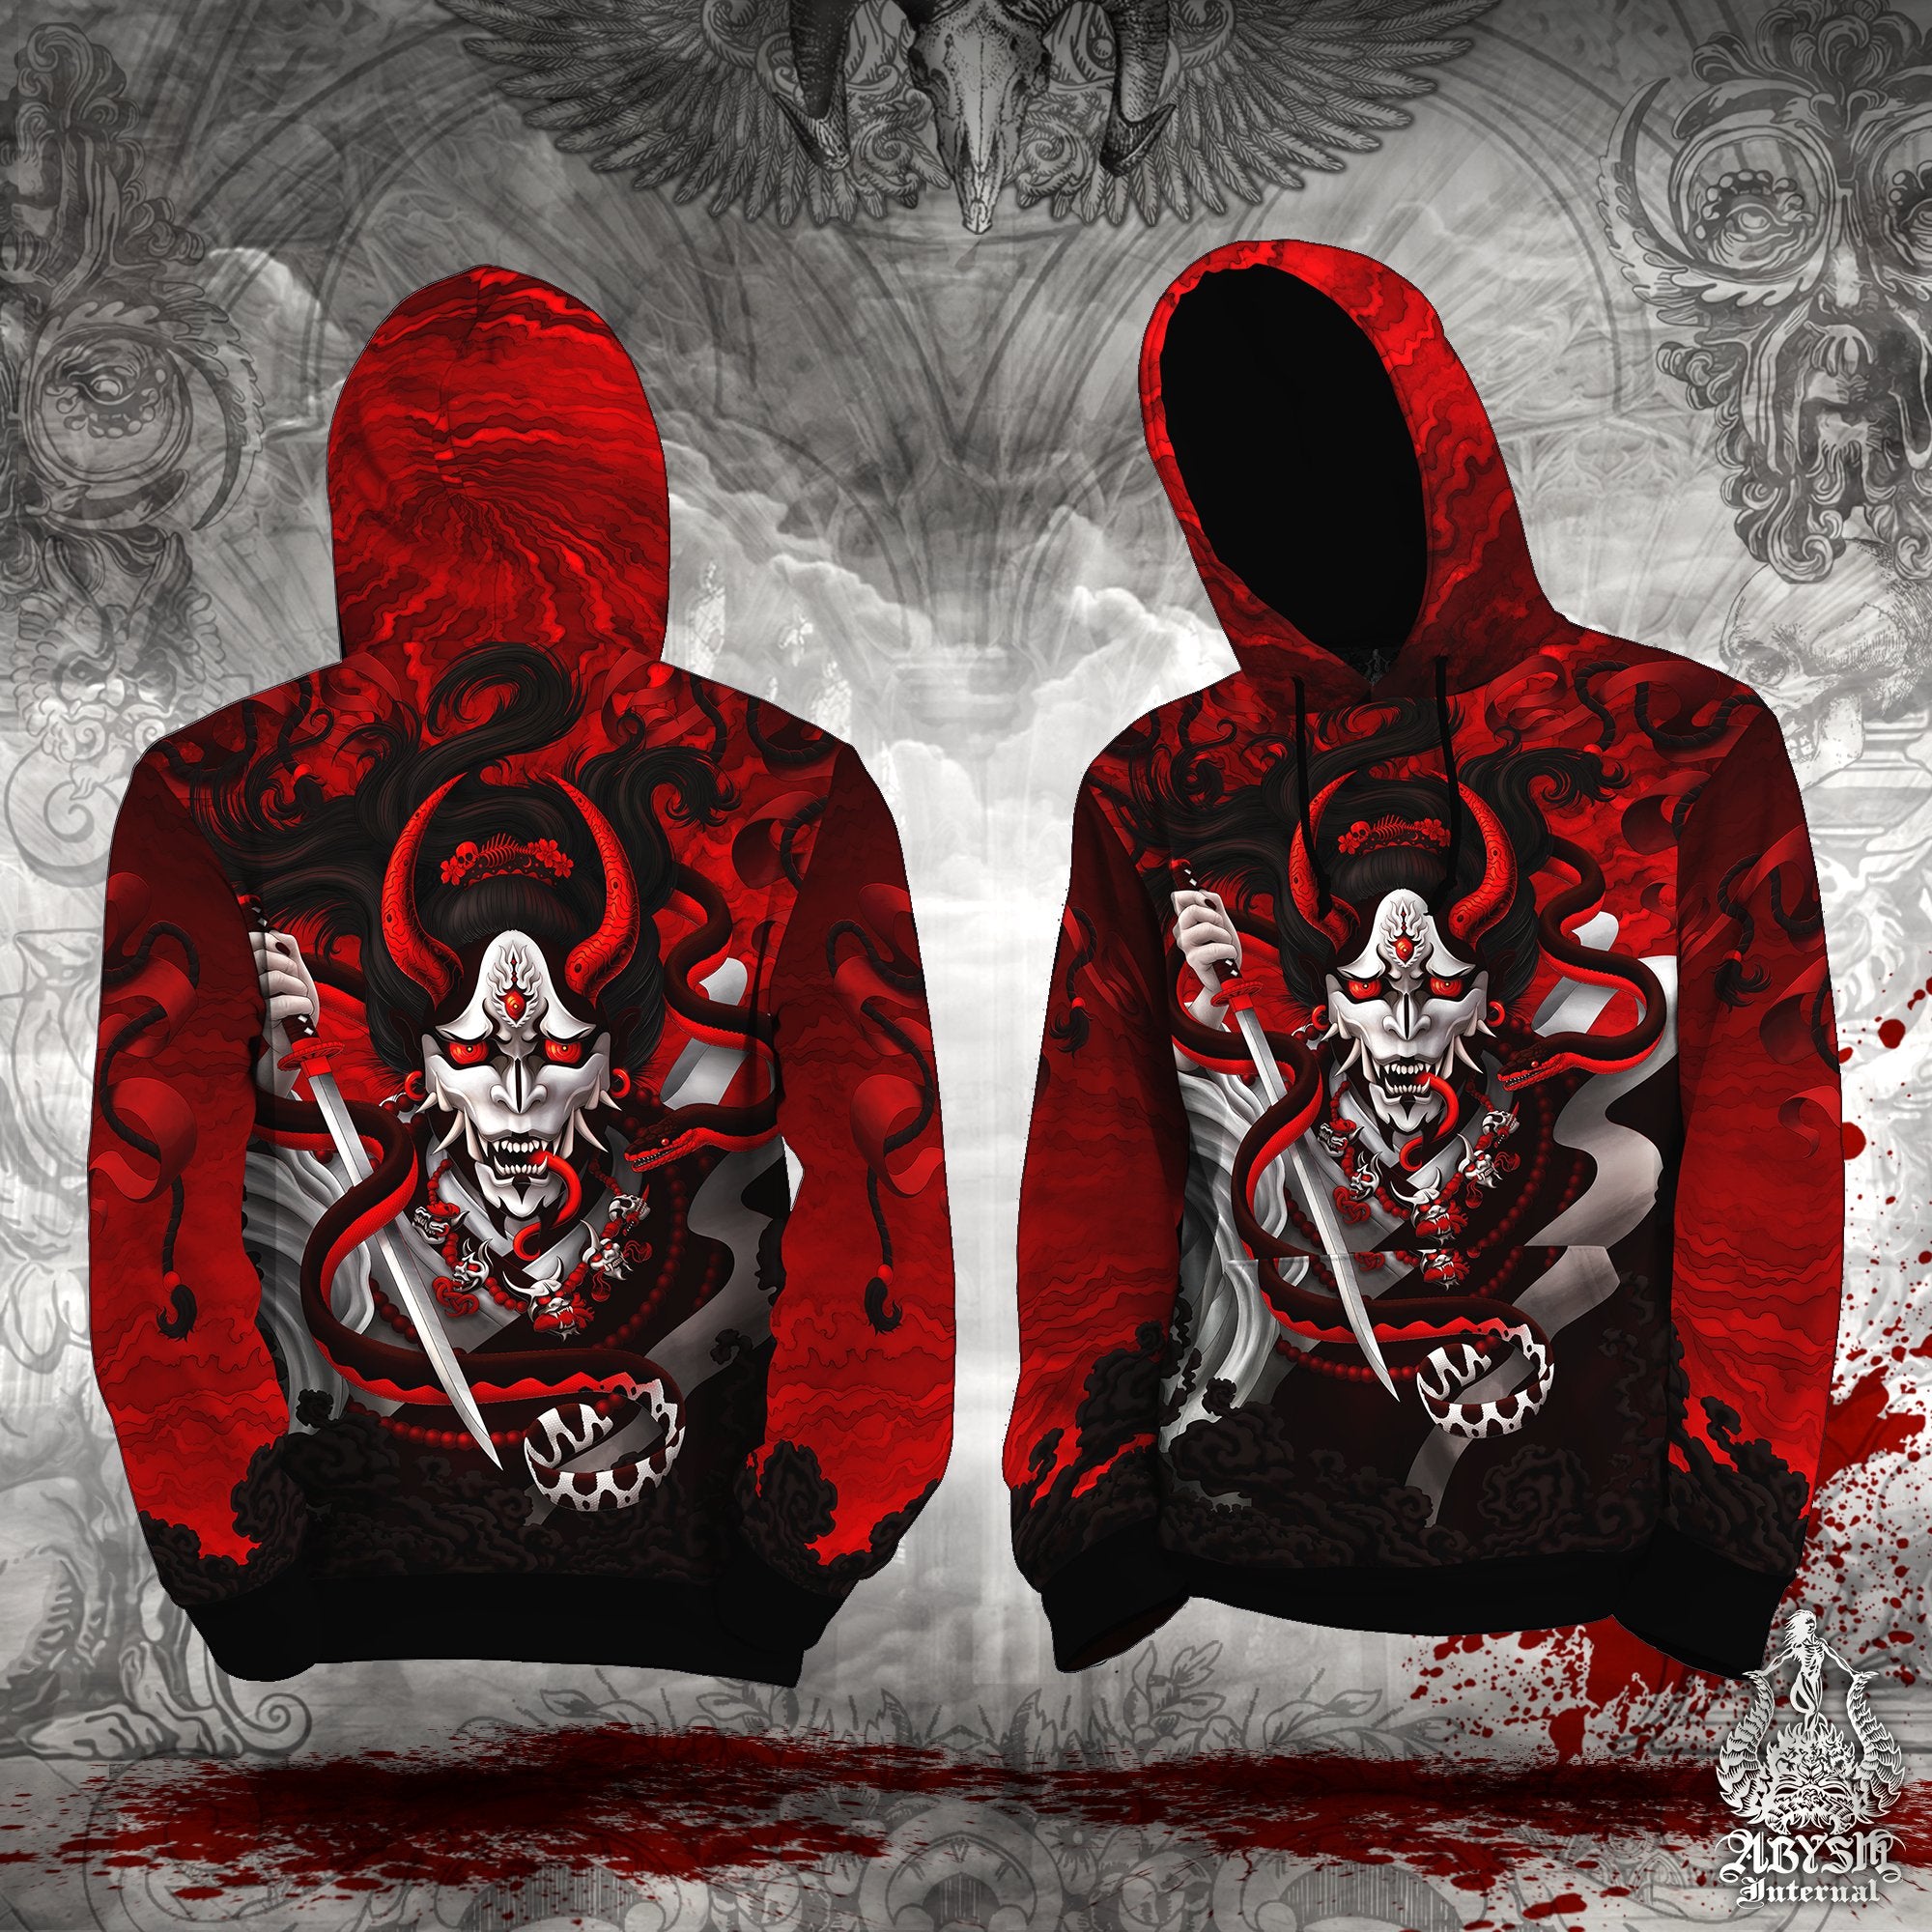 Skater Hoodie, Japanese Oni Demon Sweater, Bloody White Goth Streetwear, Parkour Street Outfit, Hannya and Snake Pullover, Alternative Clothing, Unisex - Abysm Internal